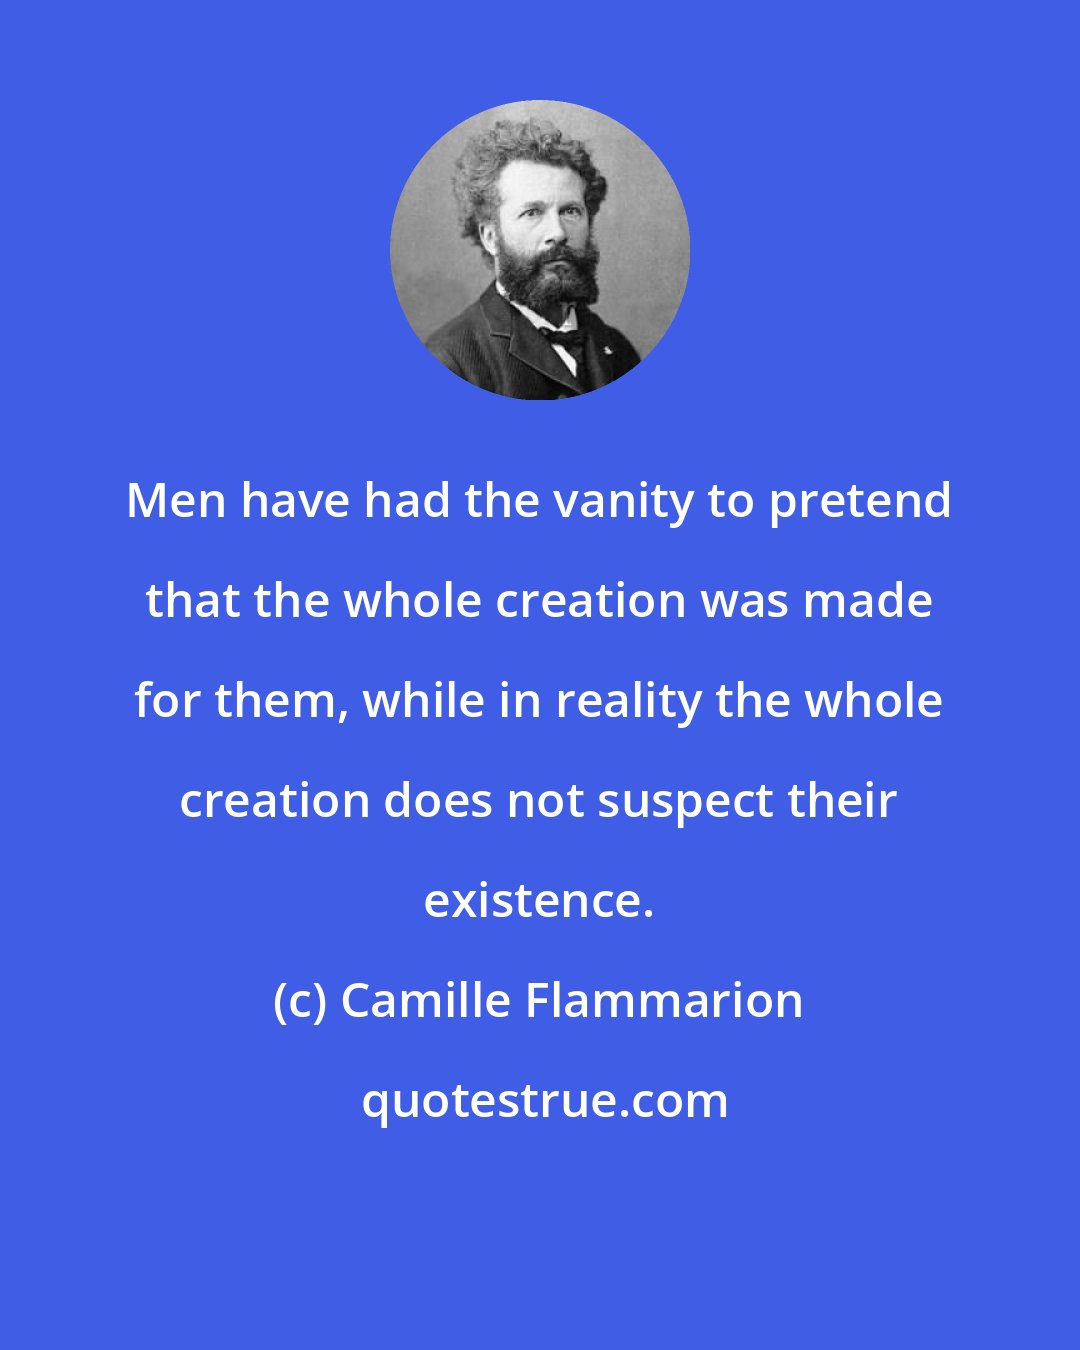 Camille Flammarion: Men have had the vanity to pretend that the whole creation was made for them, while in reality the whole creation does not suspect their existence.